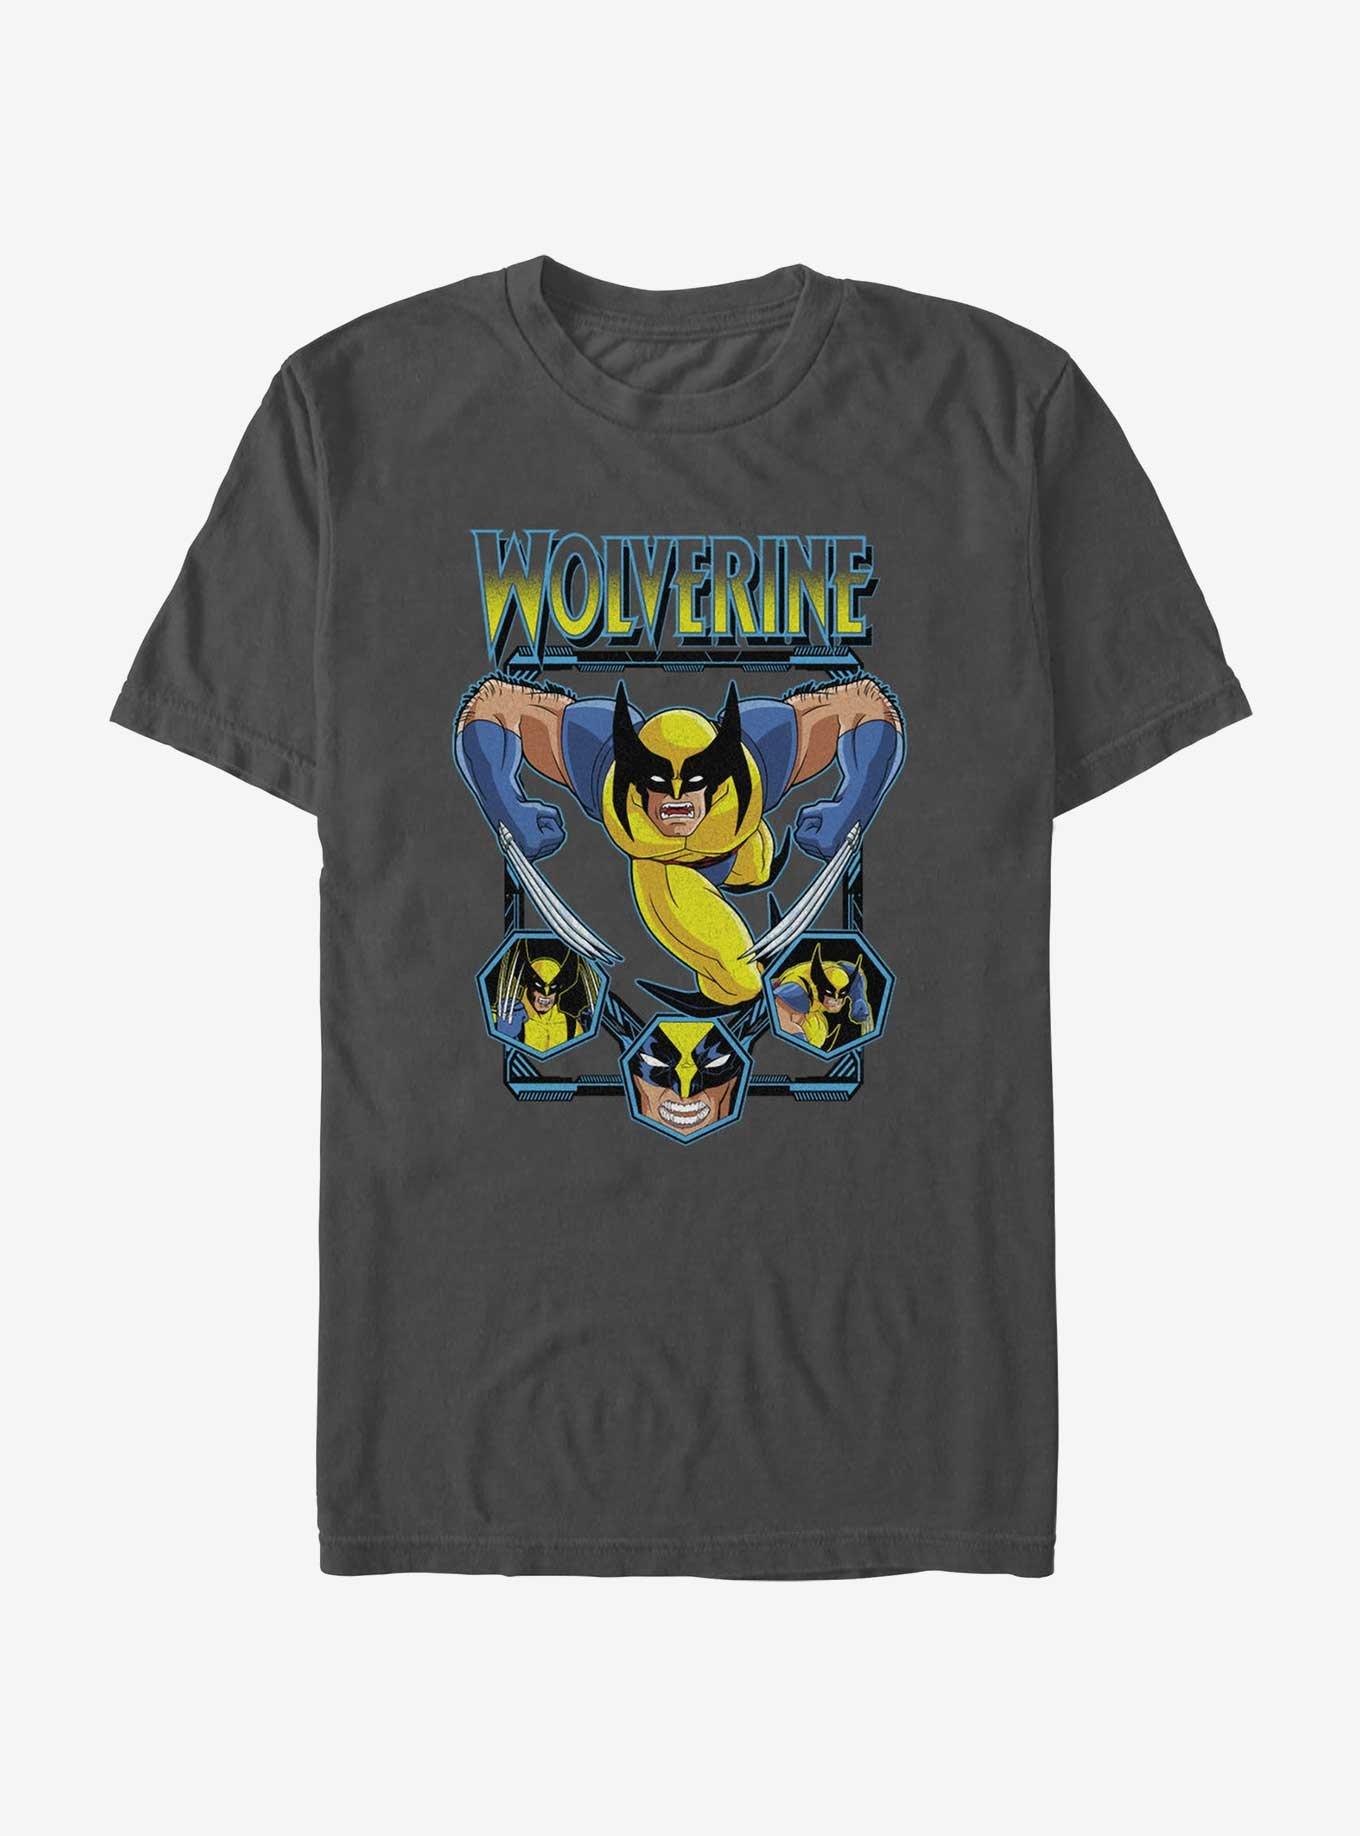 Wolverine Animated Attack T-Shirt, CHARCOAL, hi-res